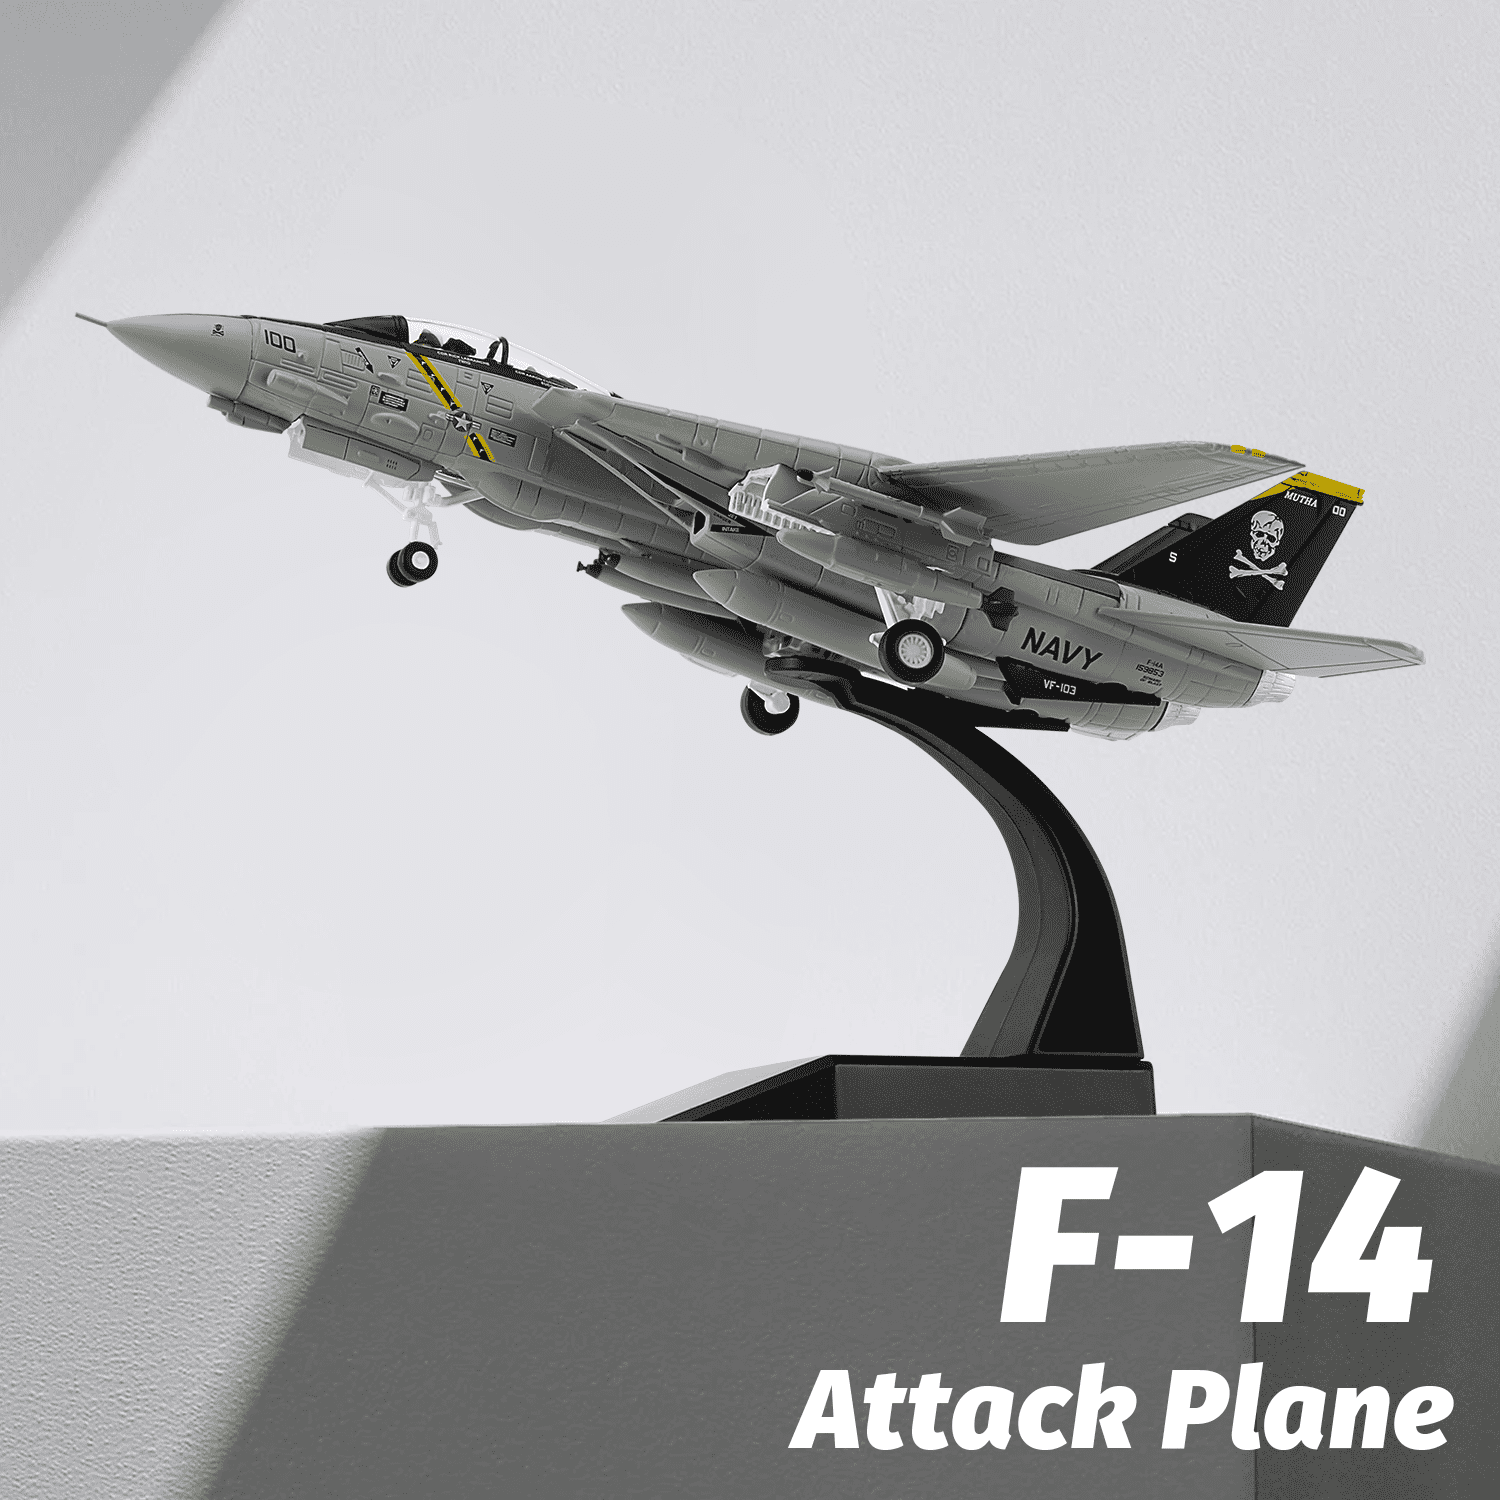 1/100 F14 Tomcat Model Skeleton Fighter Attack Plane Diecast Military  Models Metal Airplane Models for Collection or Gift, White